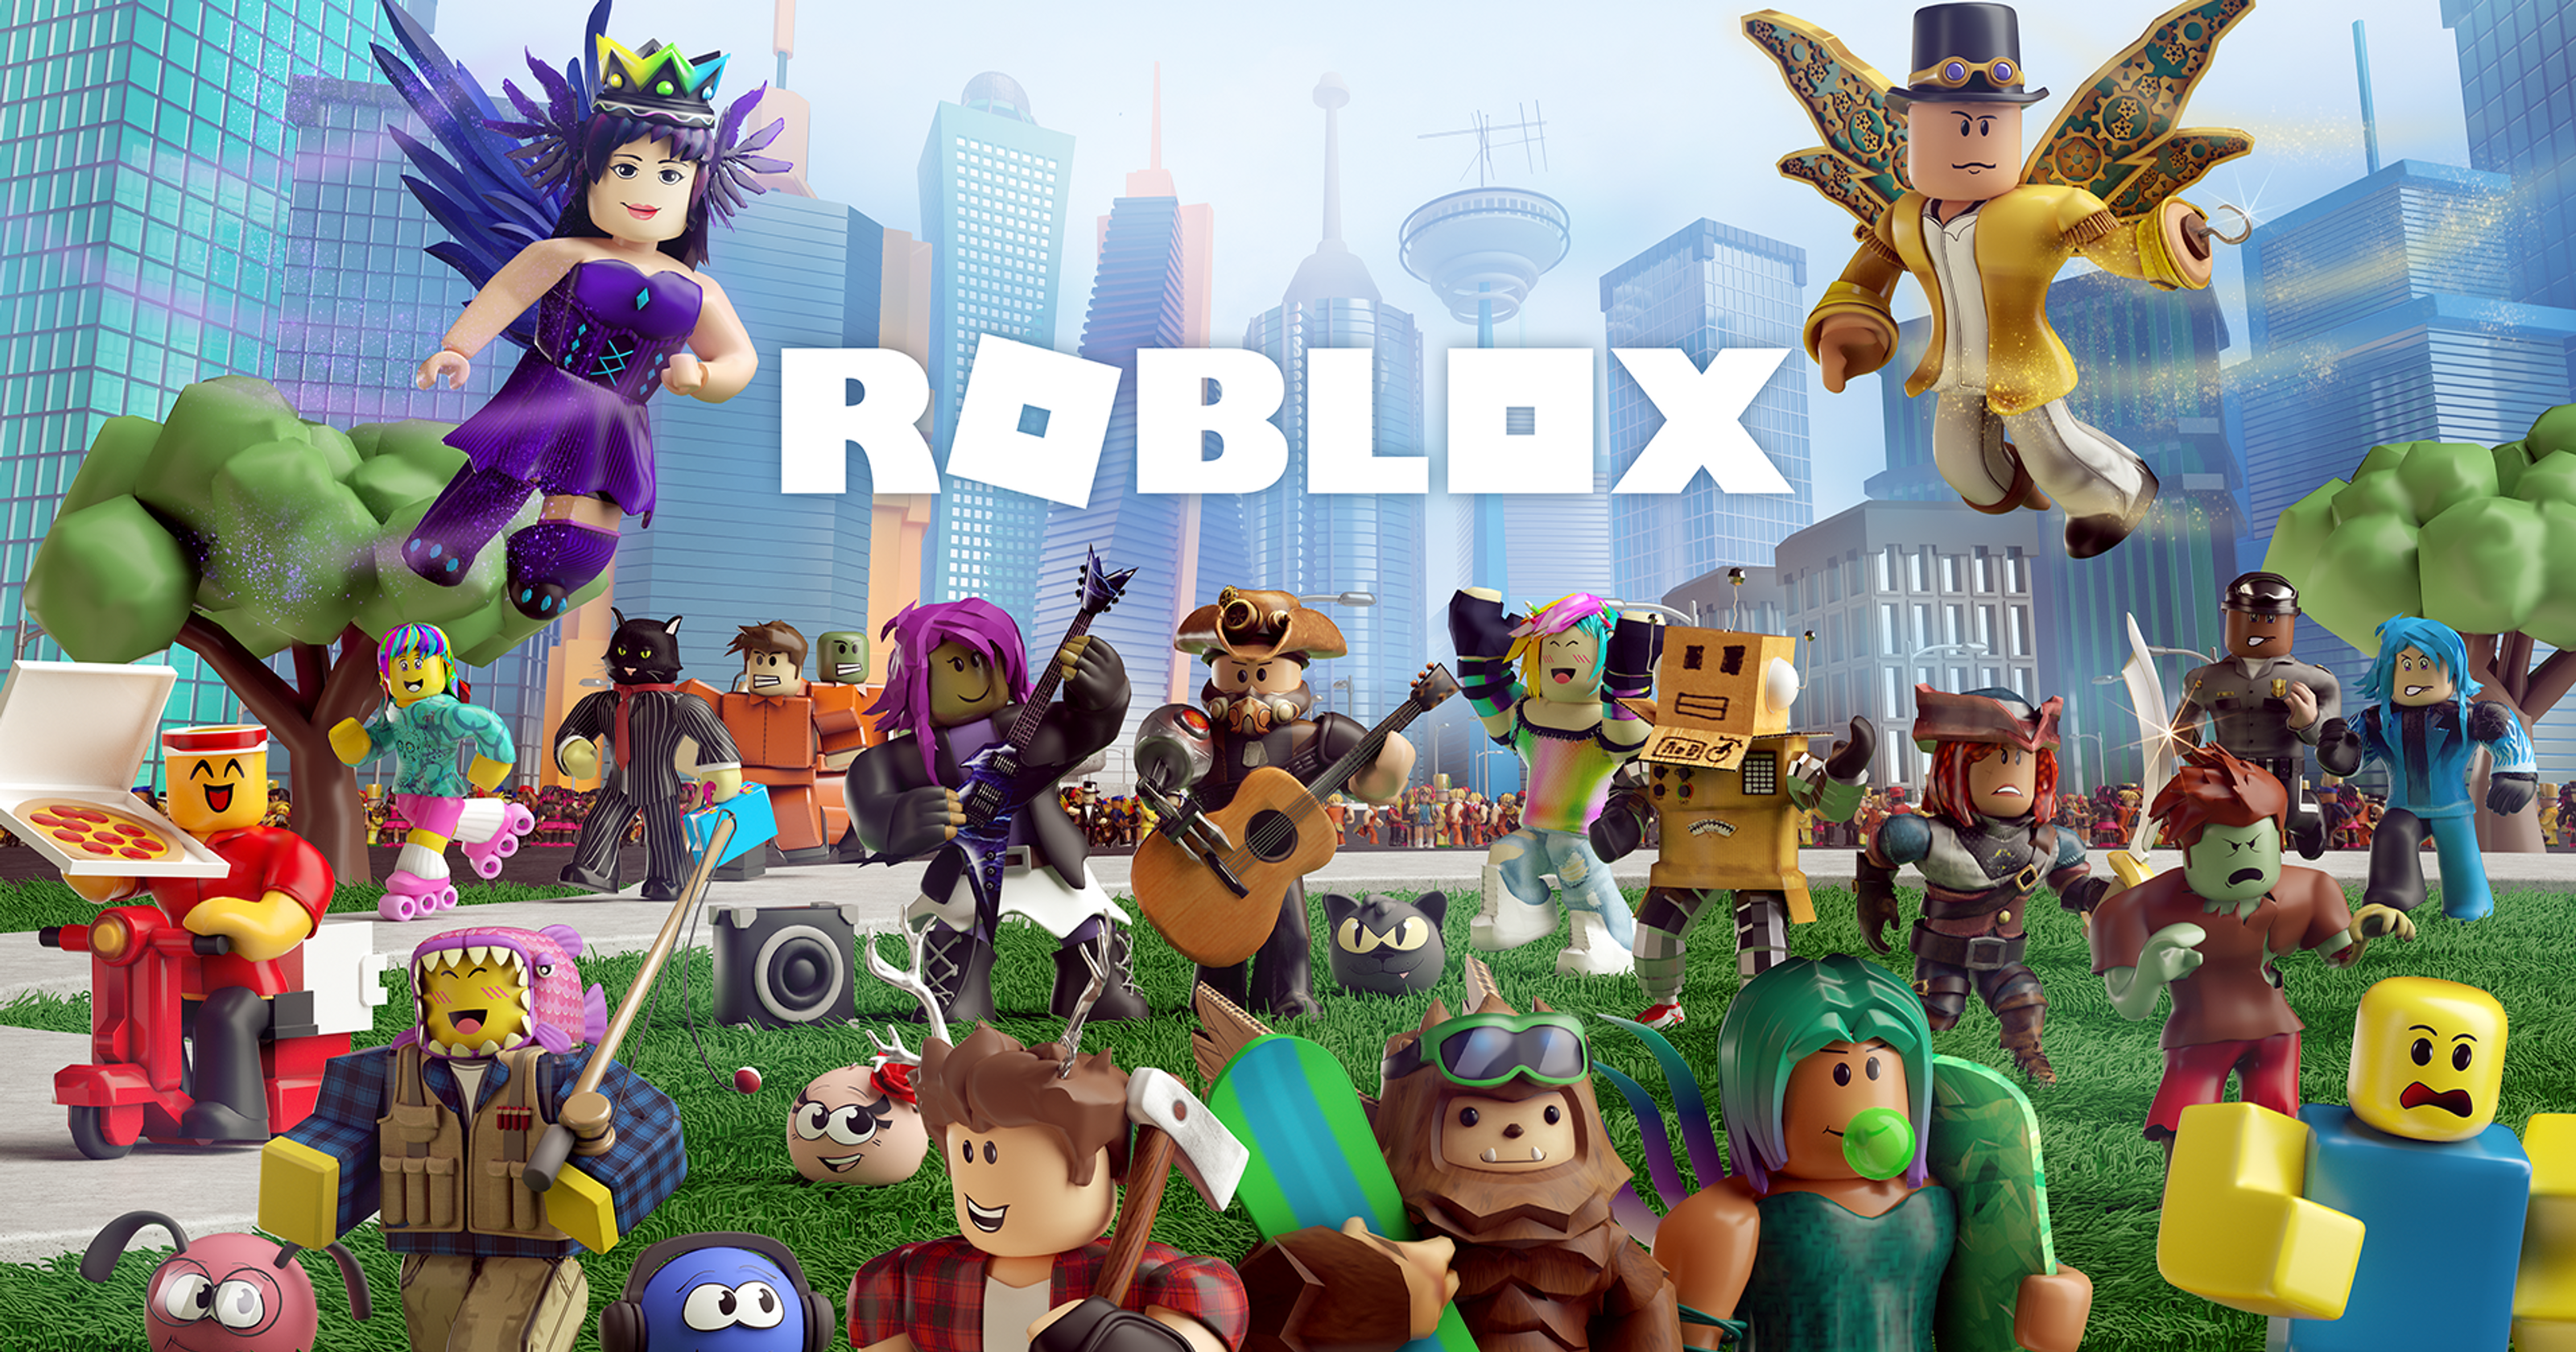 Advanced Roblox Game Scripting Summer Camp 10 Aug 2020 - lego obstacle course roblox games